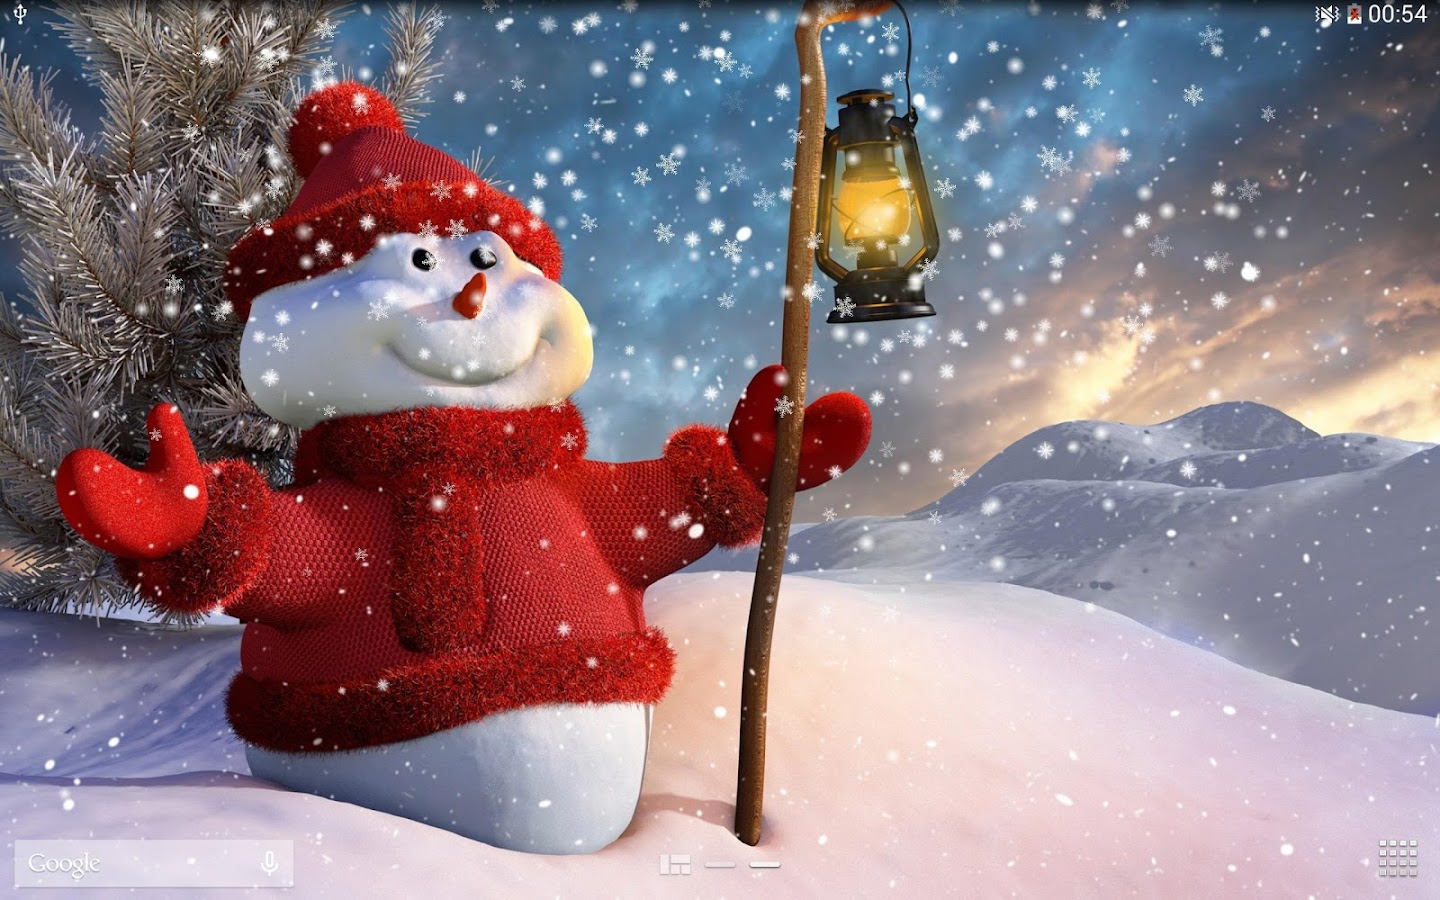 Christmas Snow Live Wallpaper  Android Apps on Google Play